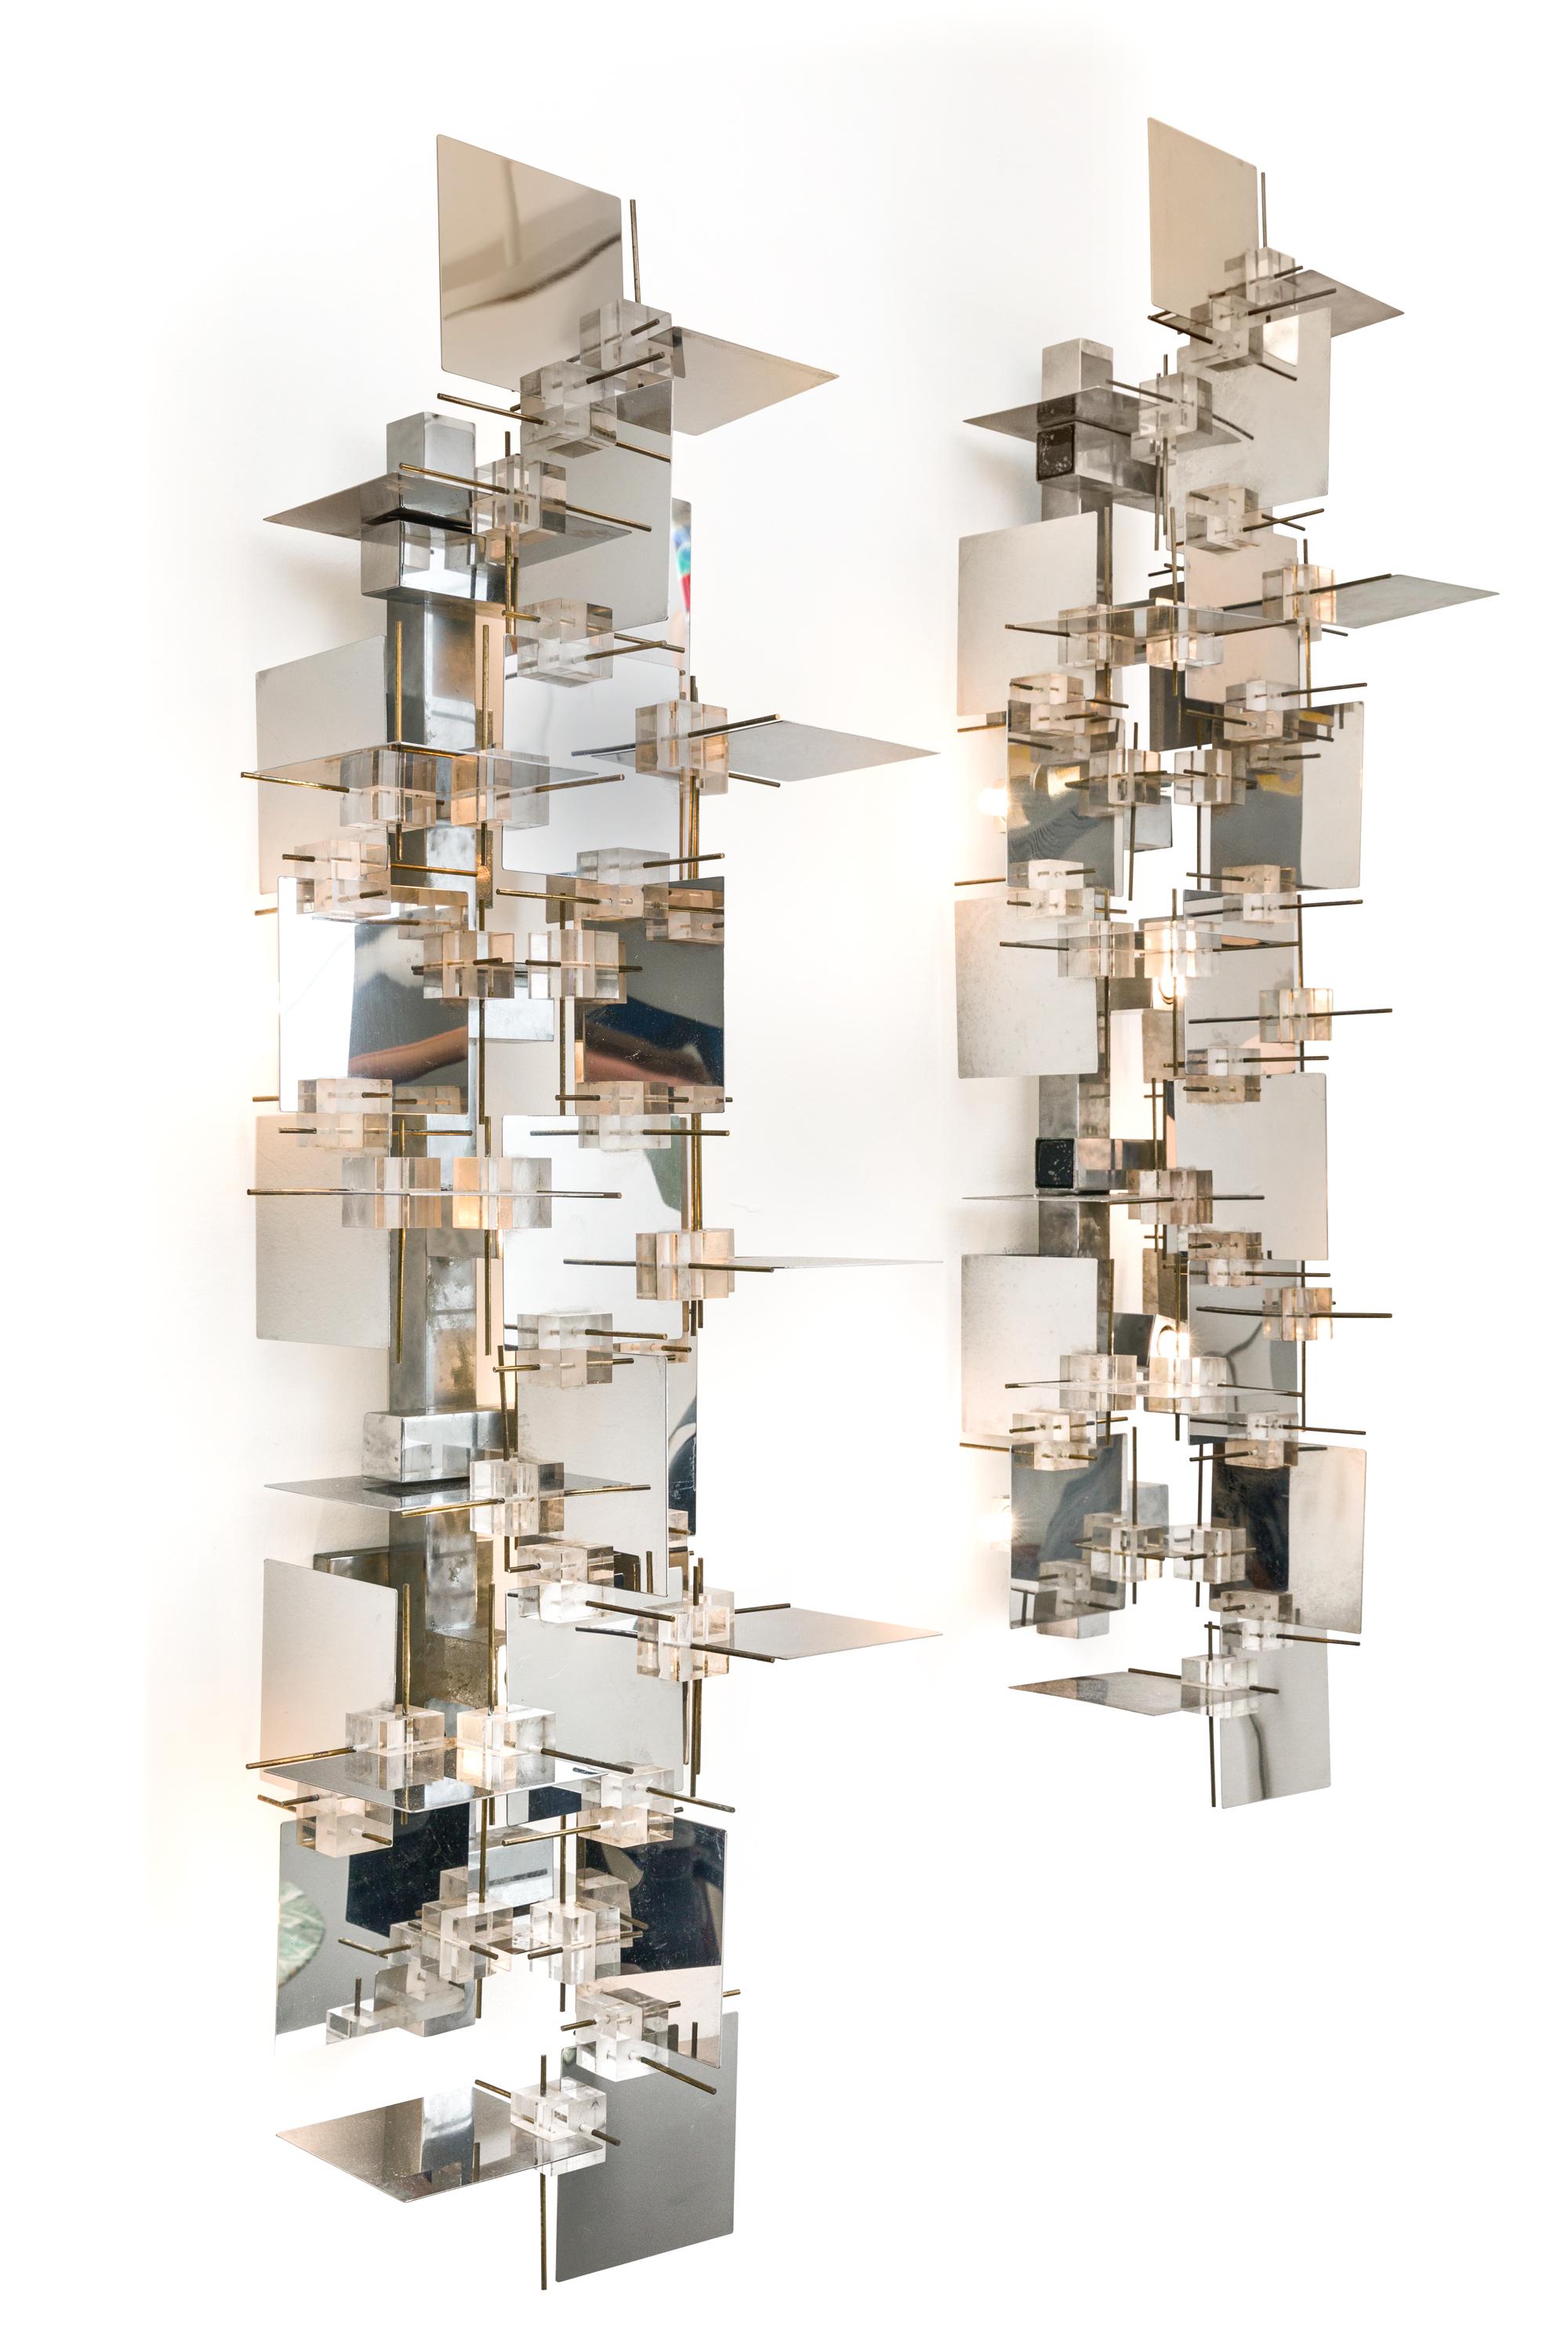 A rare and impressive pair of sconces by Gaetano Sciolari. The chrome panels create a wonderful effect reflecting the light at every angle. There is some discoloration to the Lucite cubes that is only apparent when observed closely.